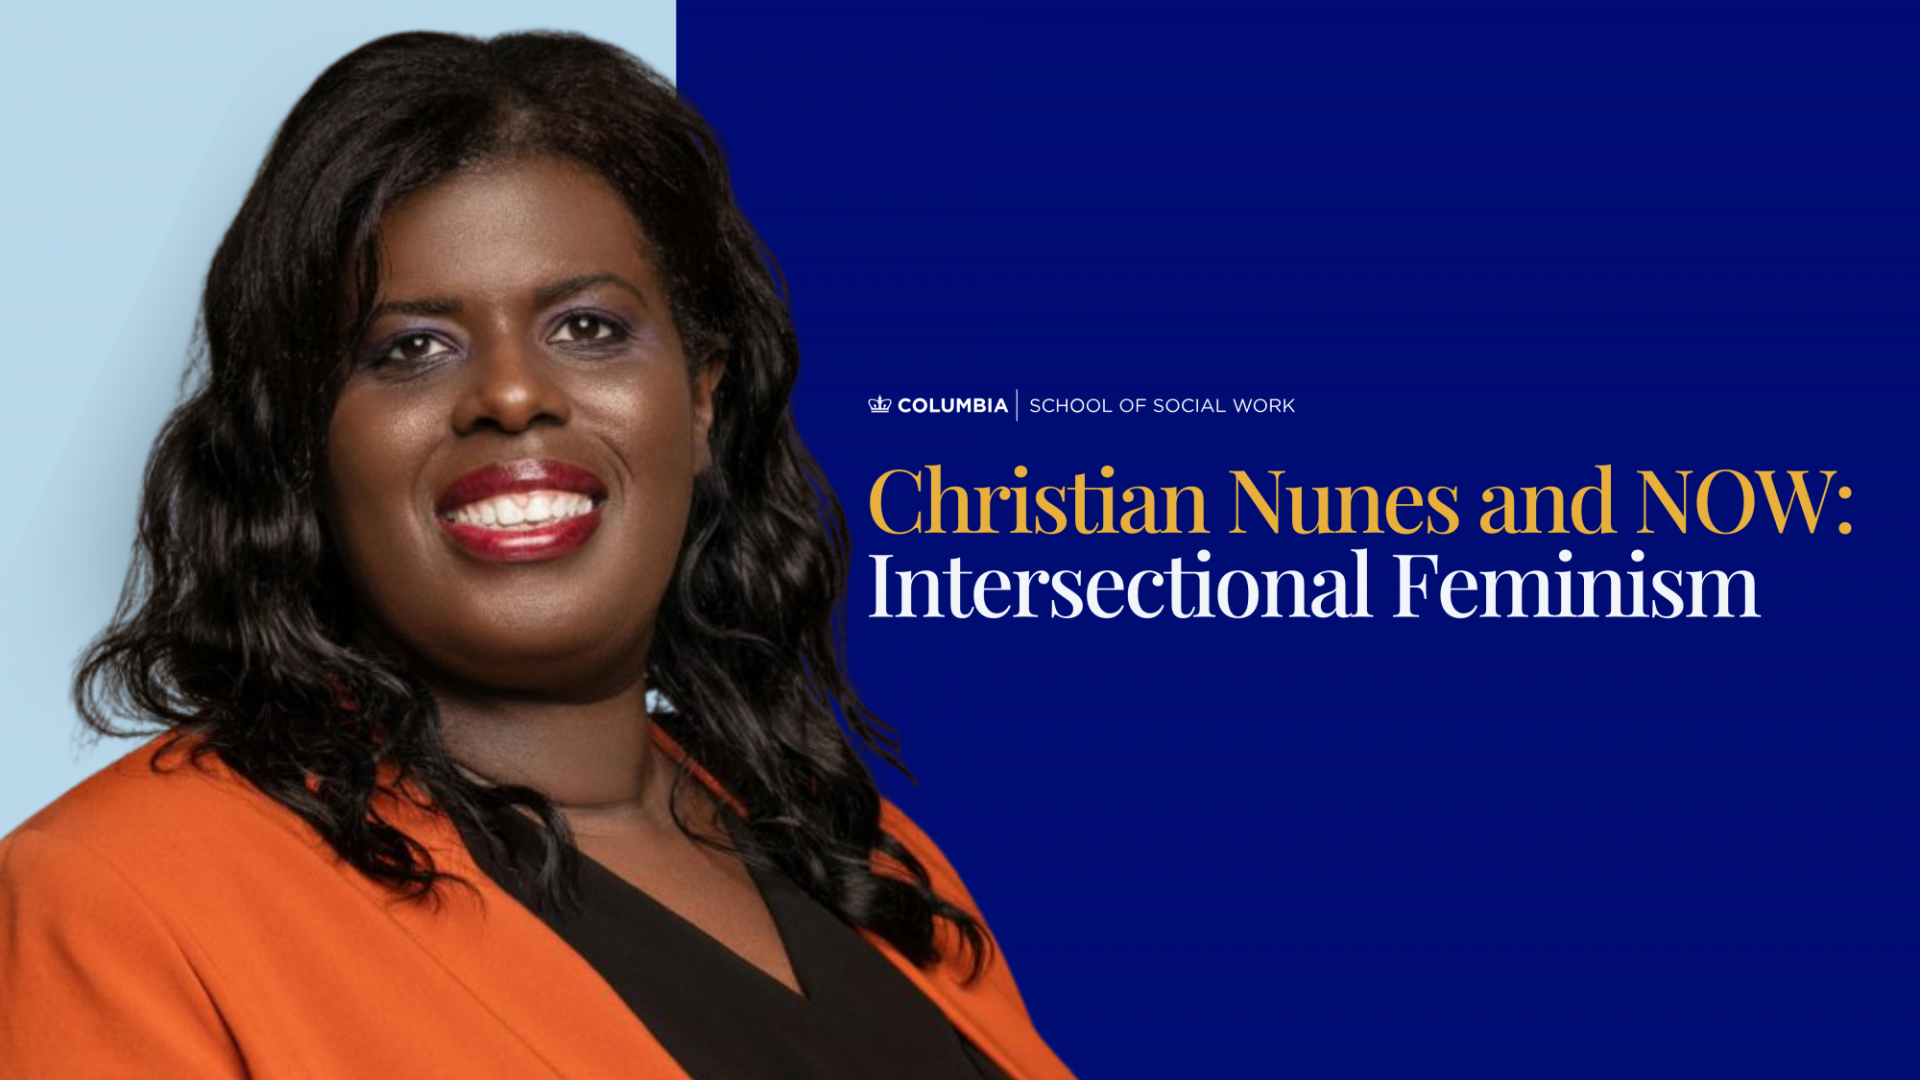 Christian Nunes and NOW: Intersectional Feminism 